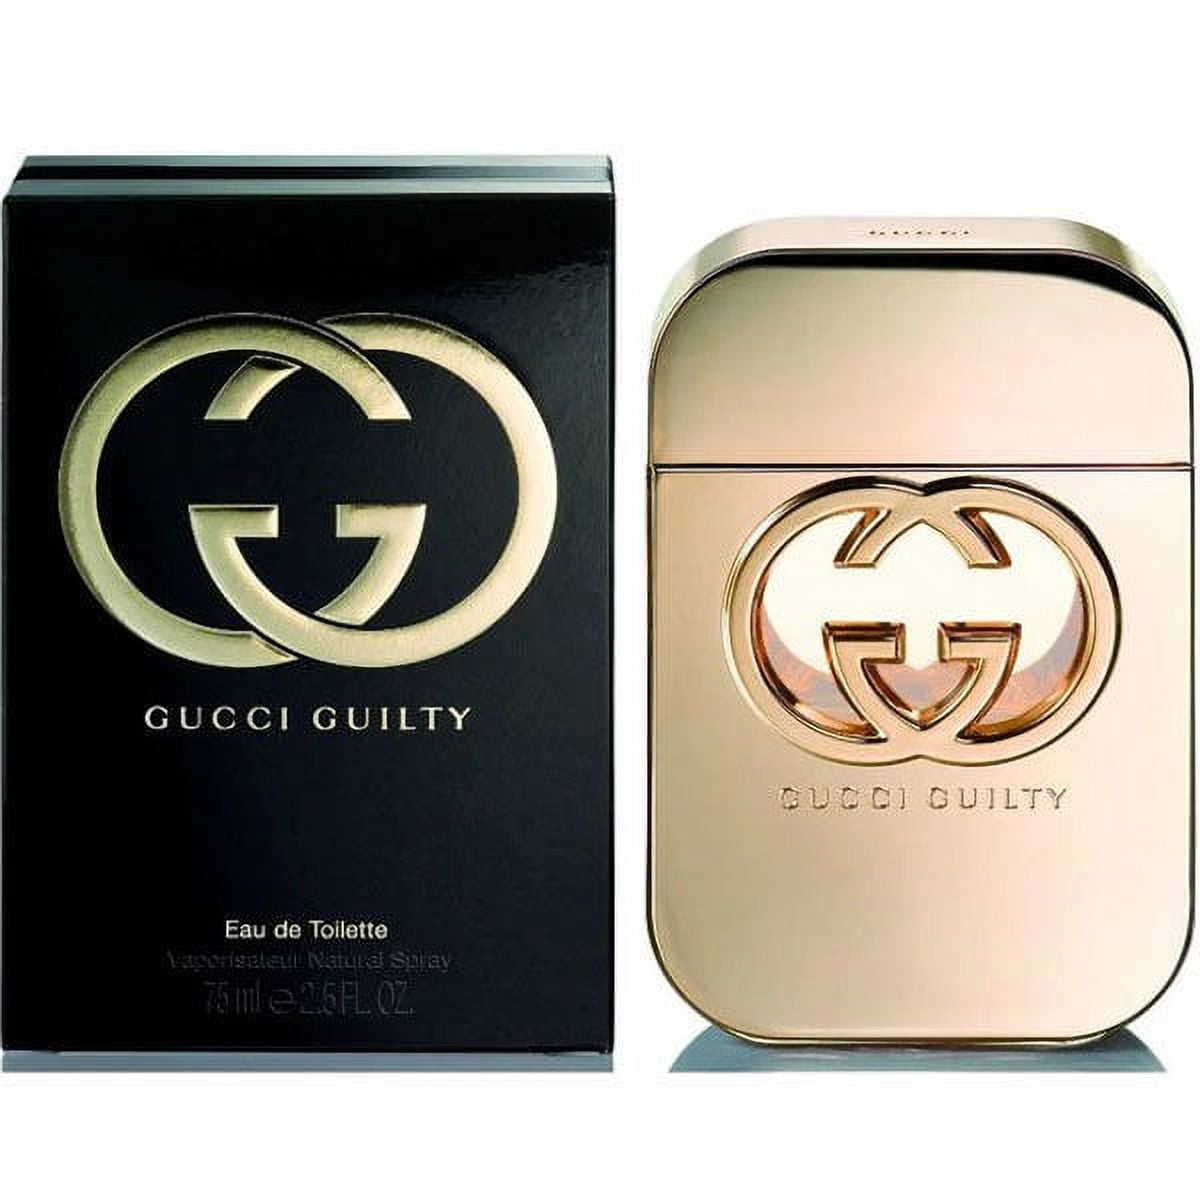 Gucci Guilty Intense Eau De Parfum Spray 75ml/2.5oz buy in United States  with free shipping CosmoStore